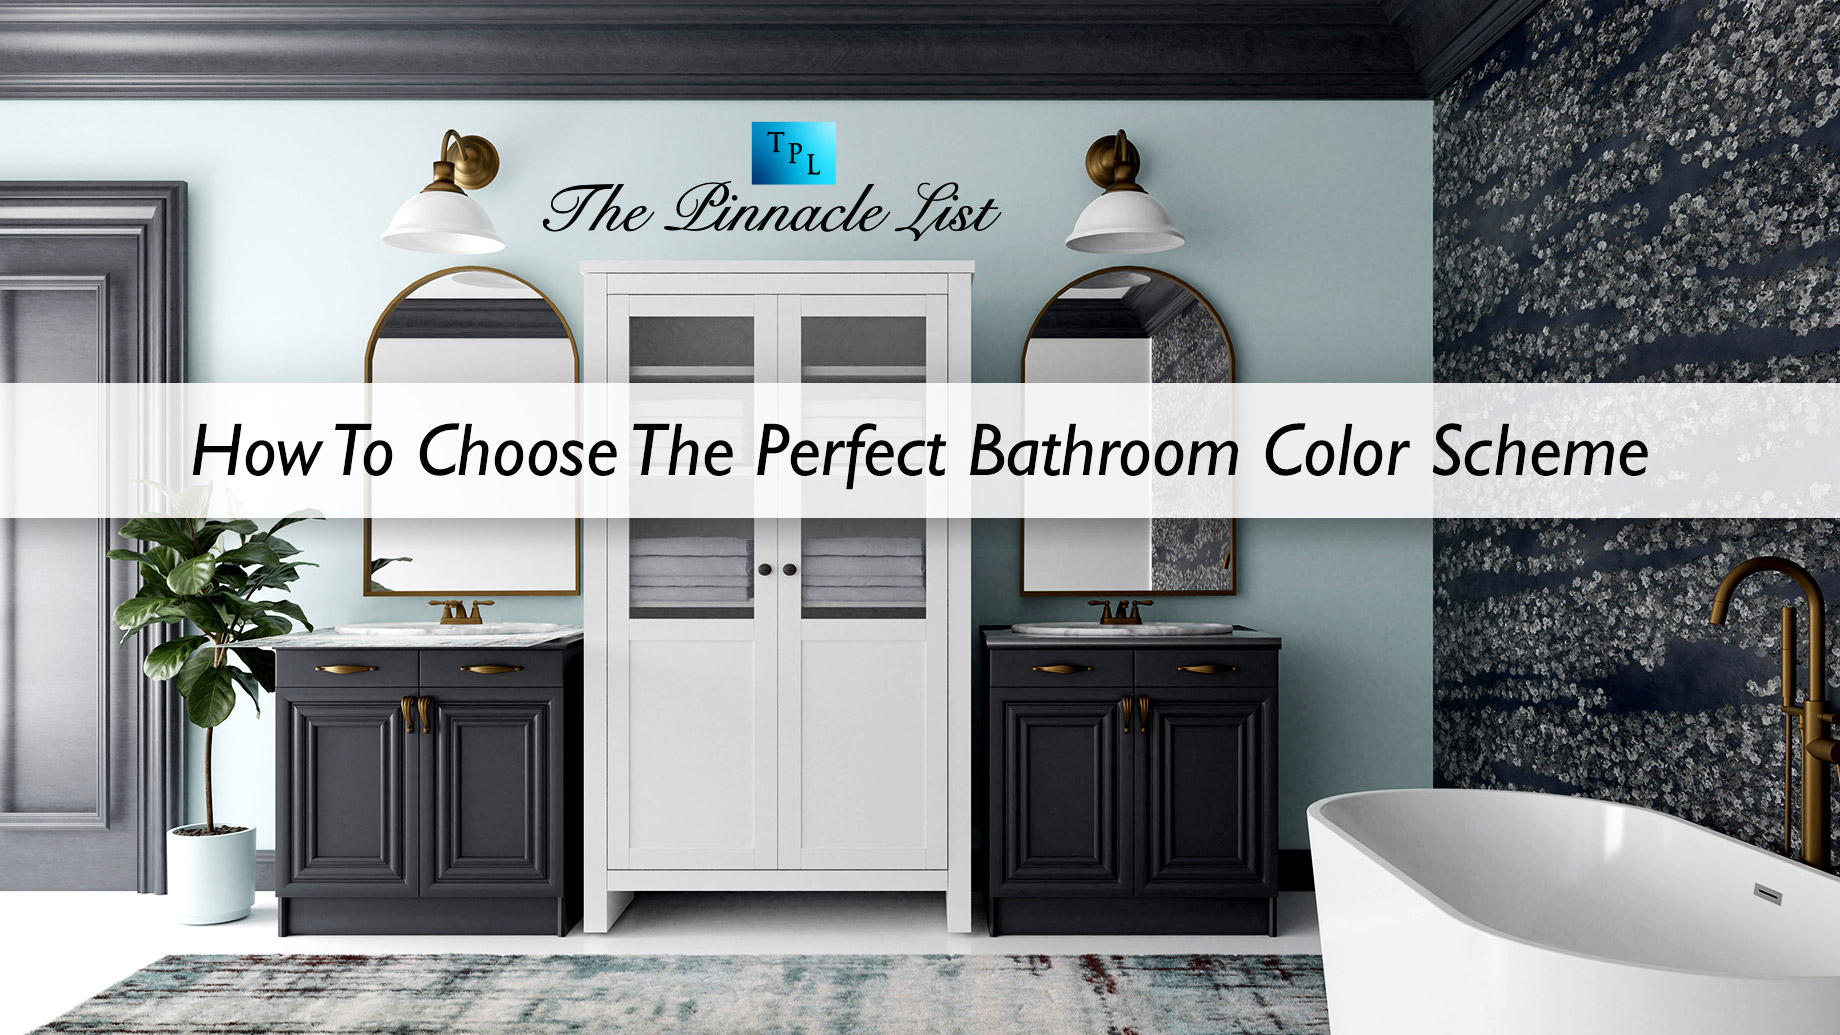 How To Choose The Perfect Bathroom Color Scheme